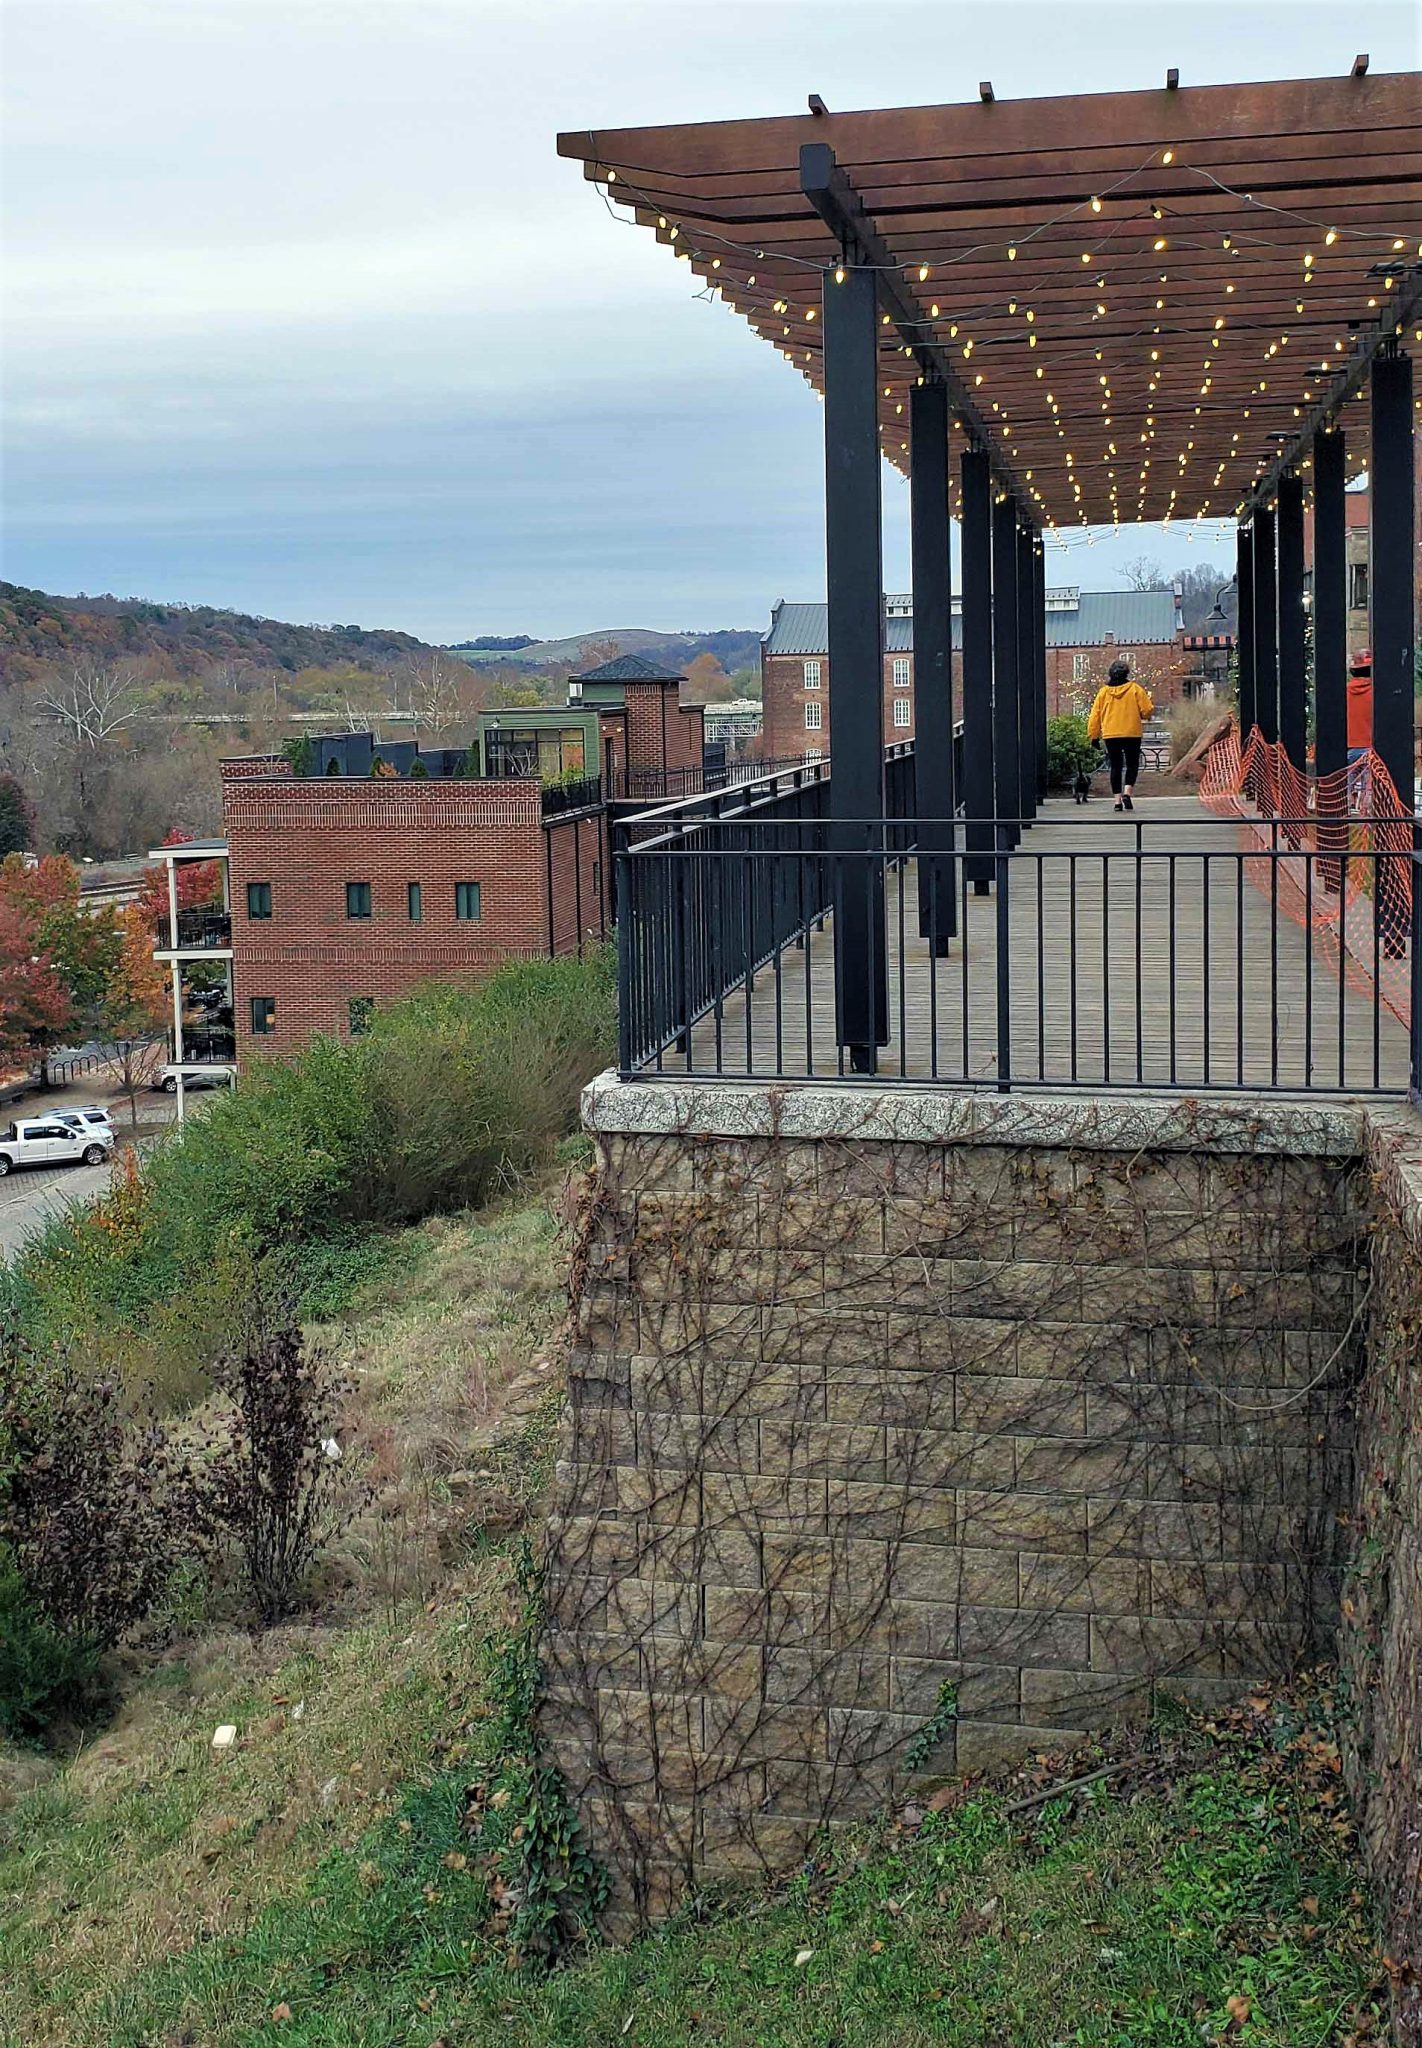 Side view of retaining wall at Lynchburg's Bluffwalk tourist attraction.